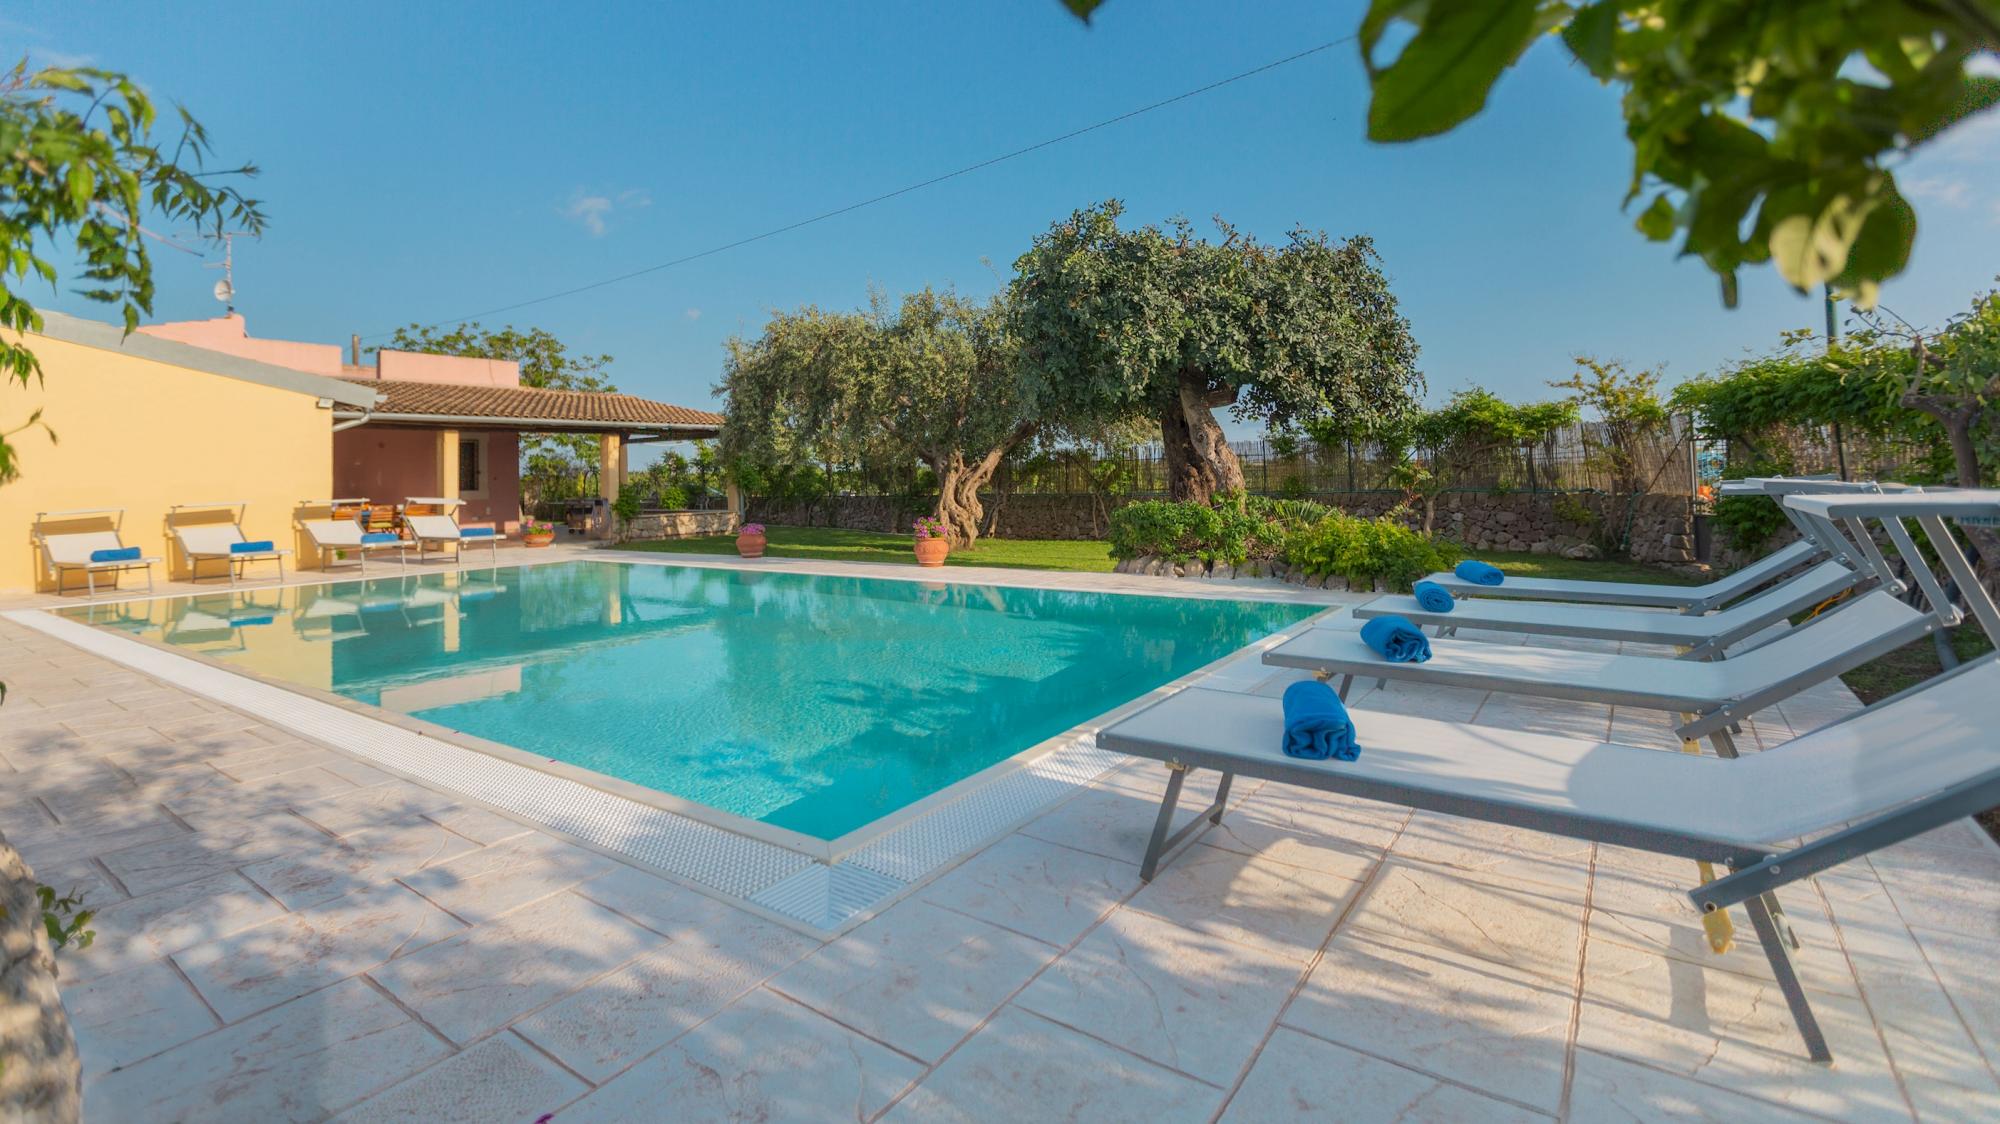 Property Image 1 - Lovely Sicilian Rustic Villa with Nice Pool and Garden